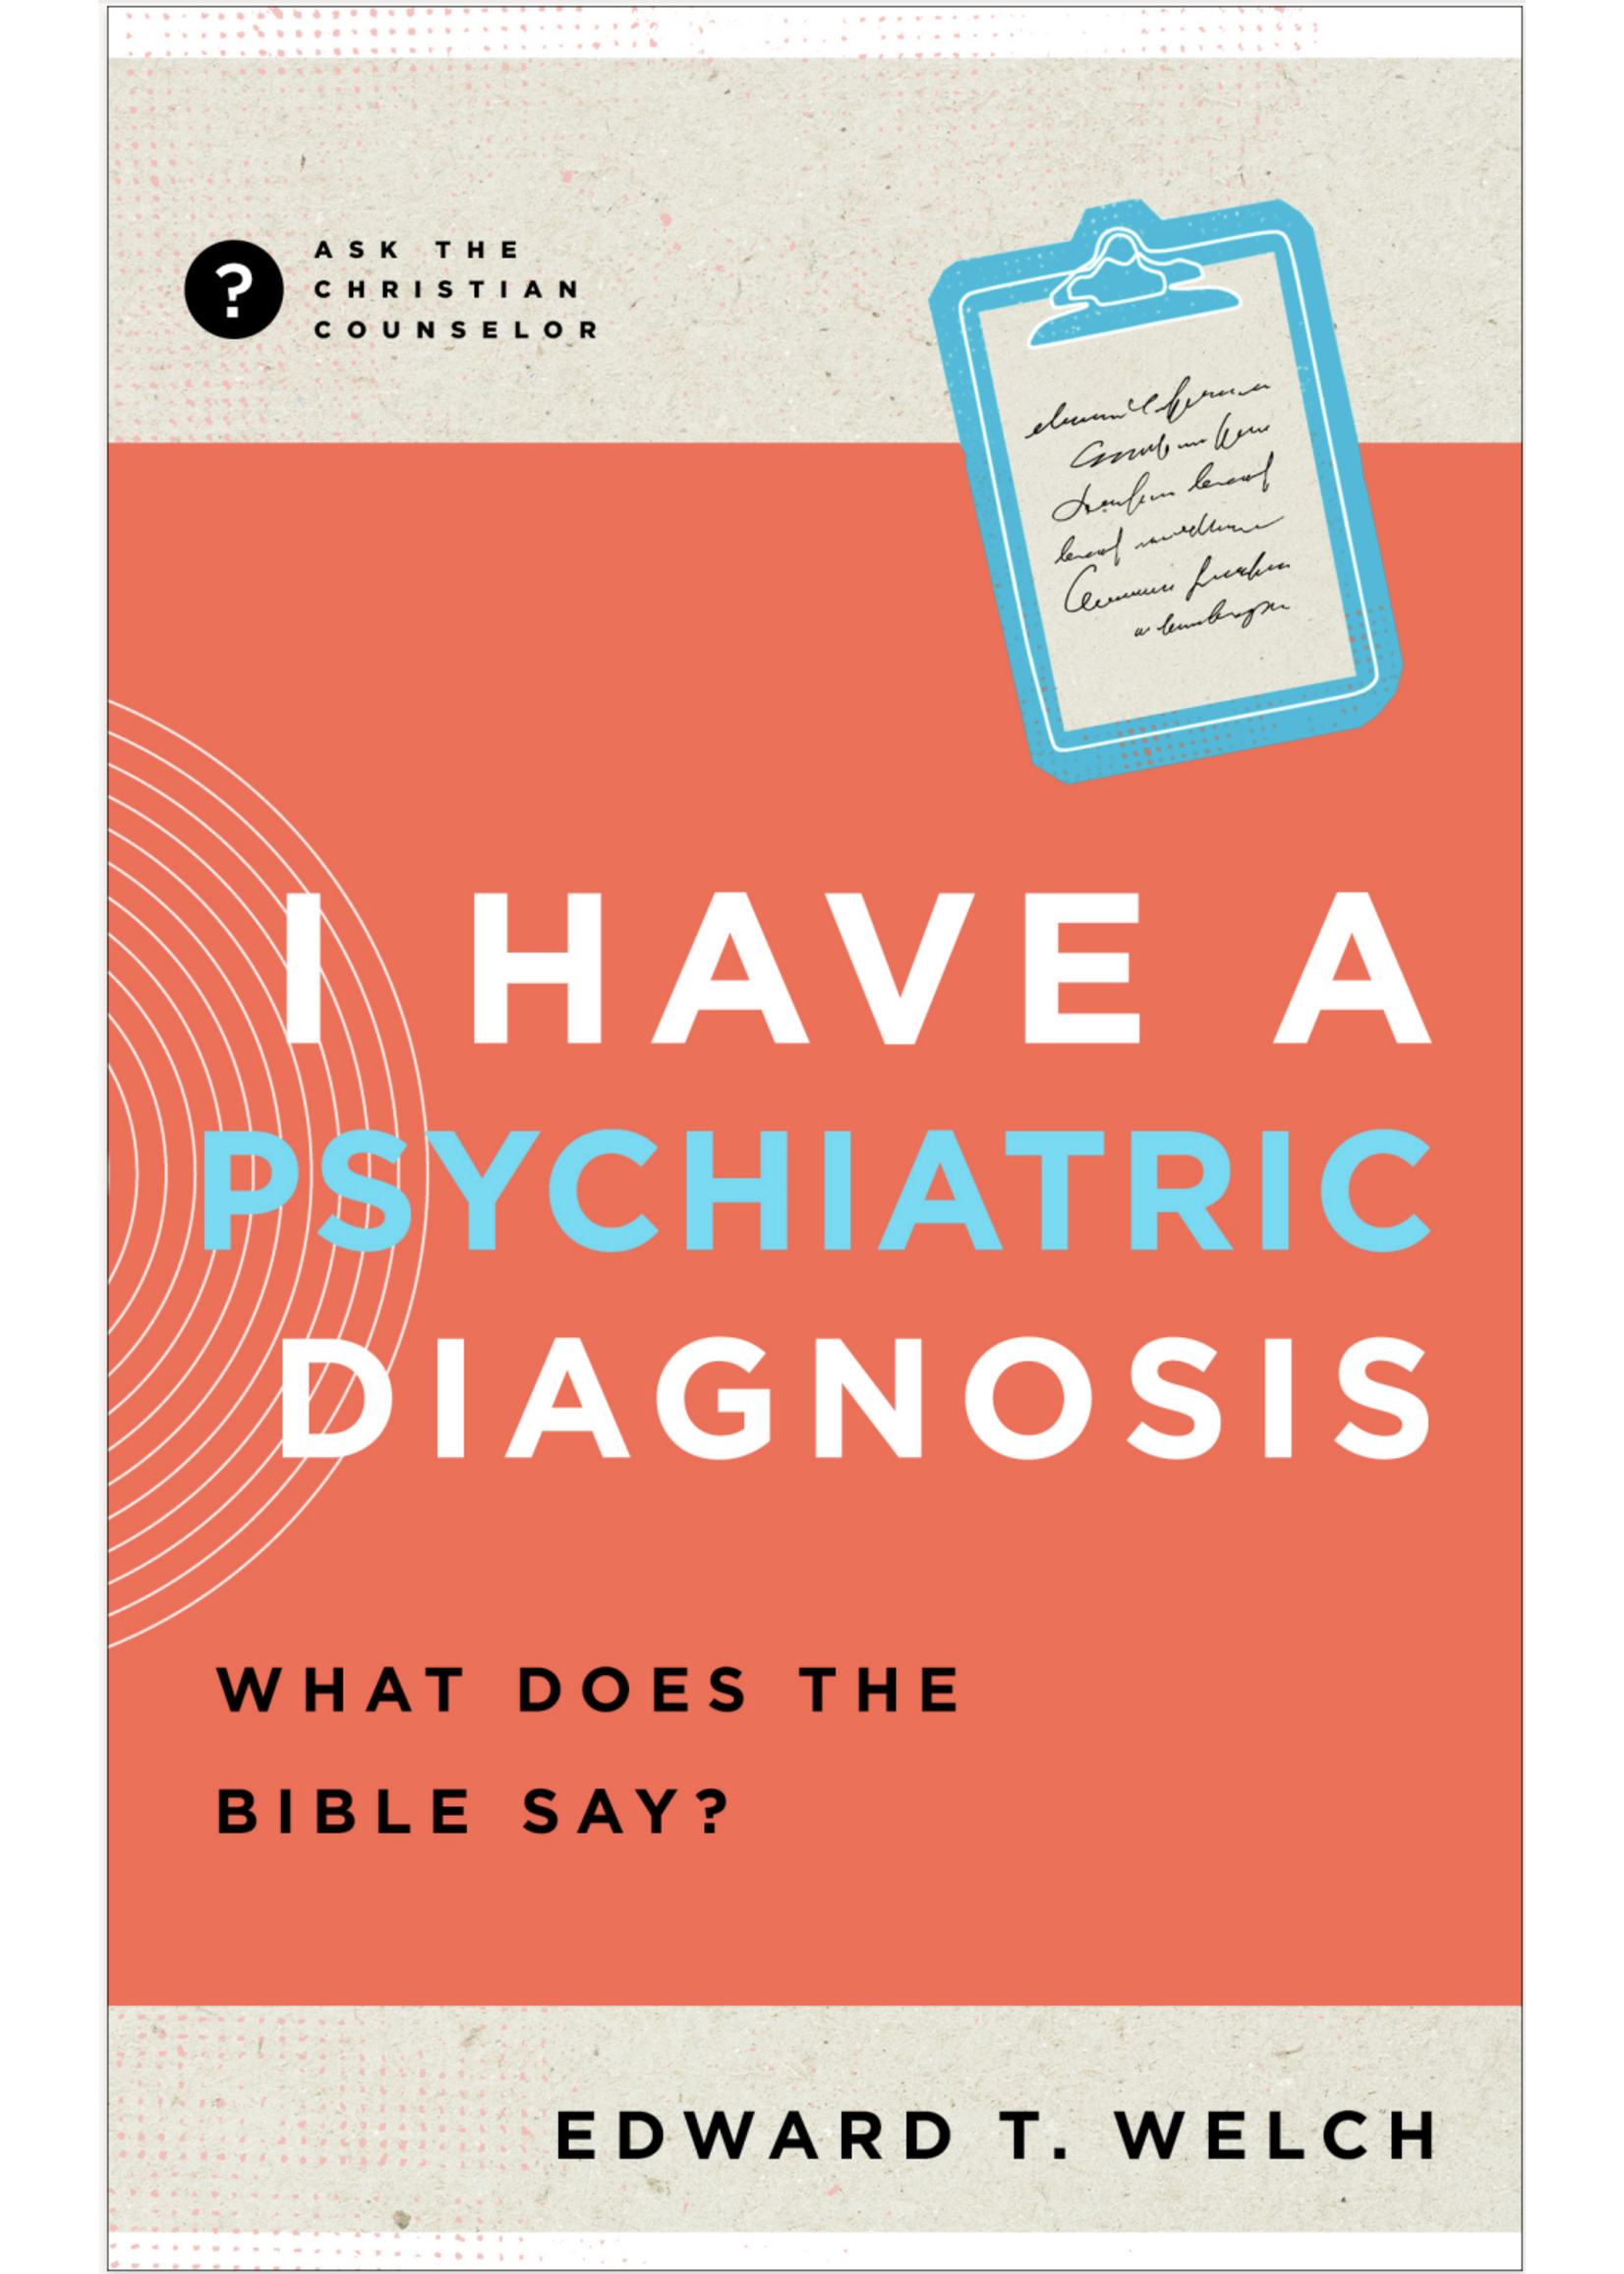 WELCH, EDWARD I Have a Psychiatric Diagnosis: What Does the Bible Say? (Ask the Christian Counselor)